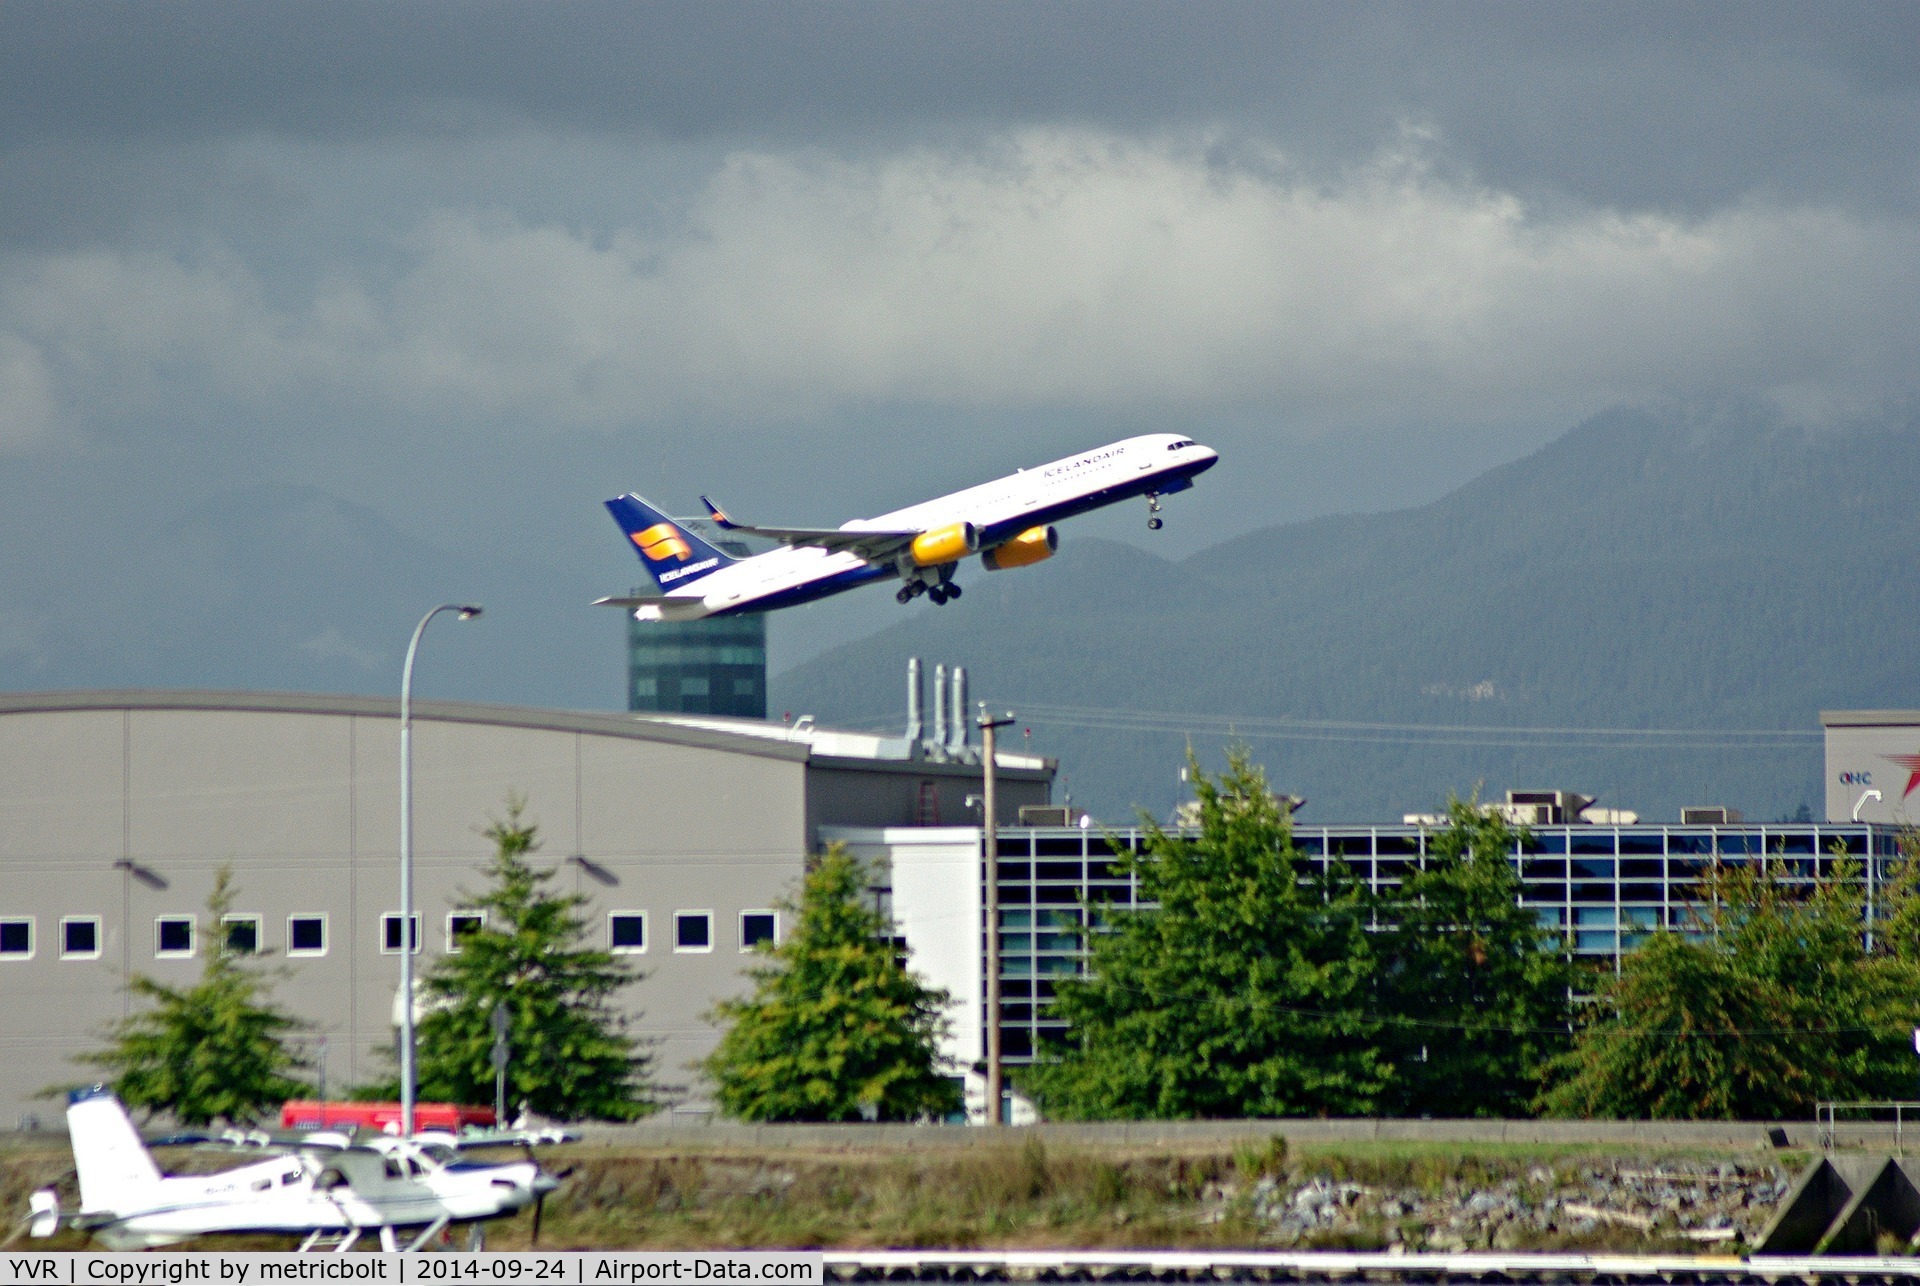 Vancouver International Airport, Vancouver, British Columbia Canada (YVR) - Icelandair departure from YVR